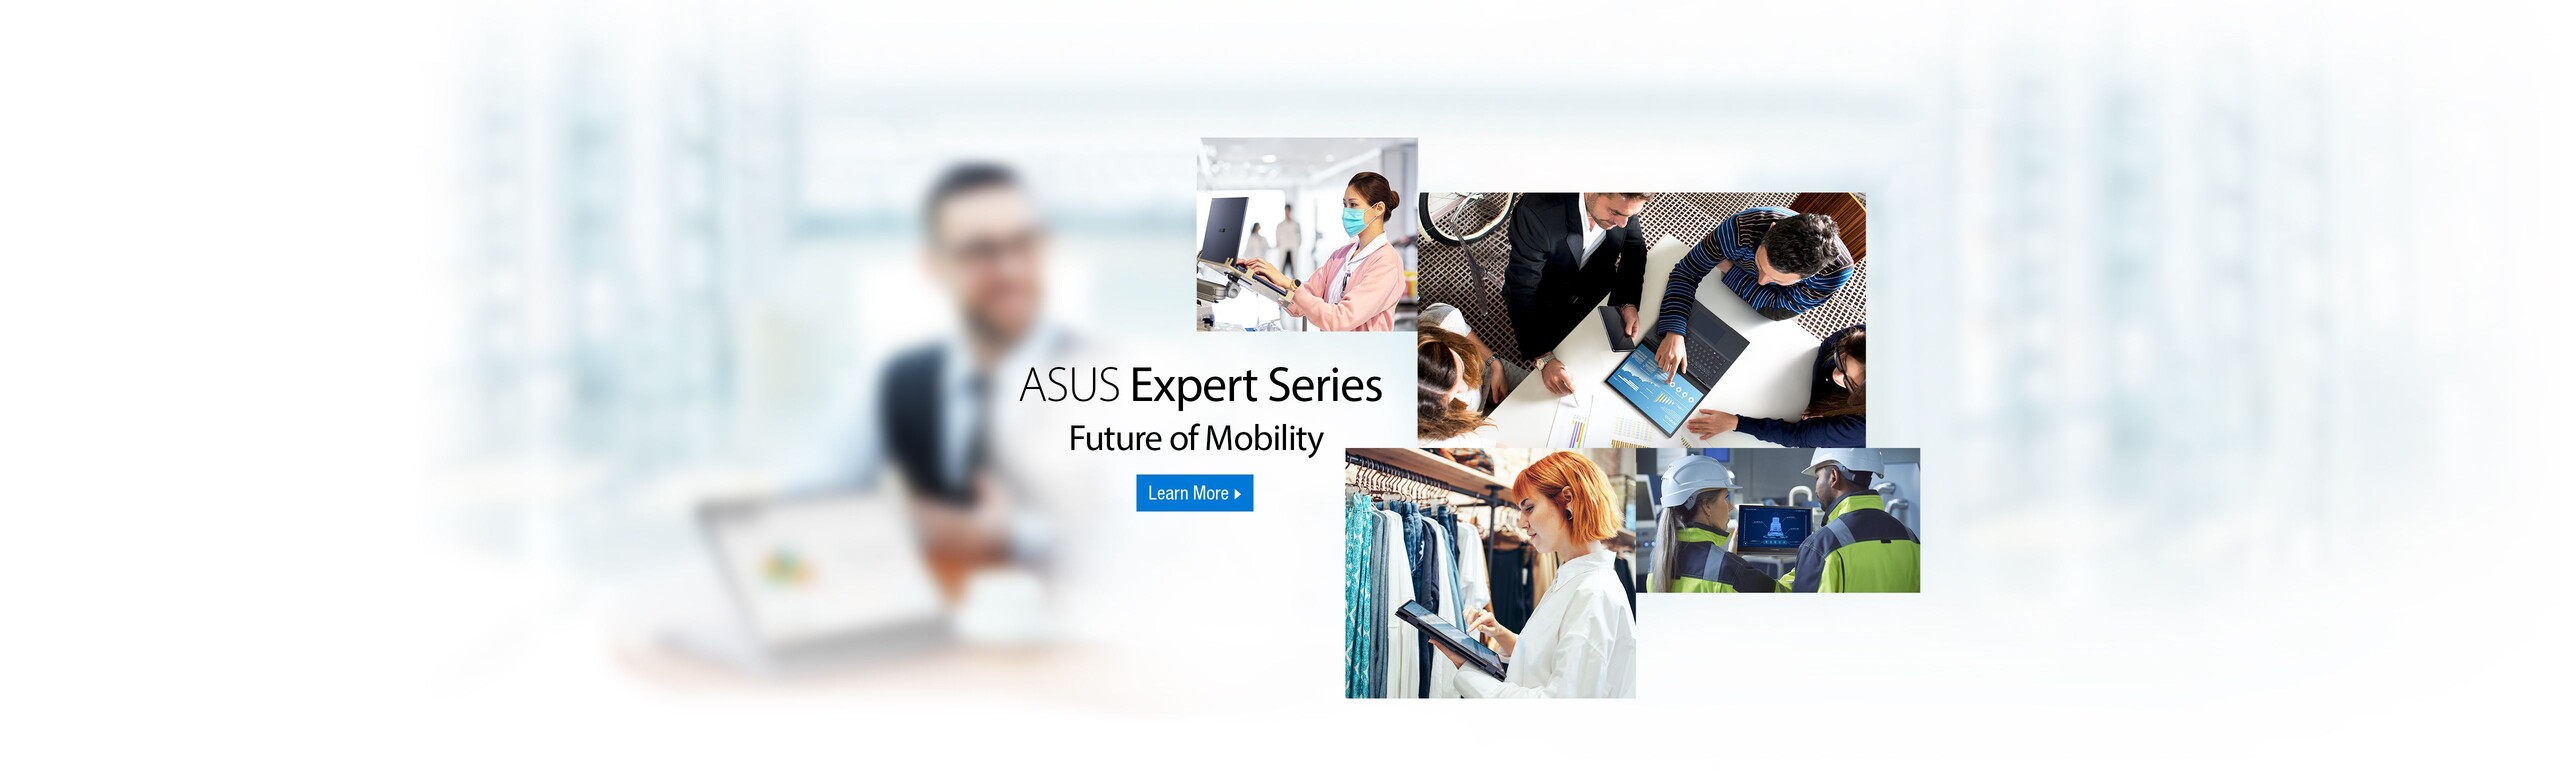 ASUS Expert Series  Future of Mobility Learn More